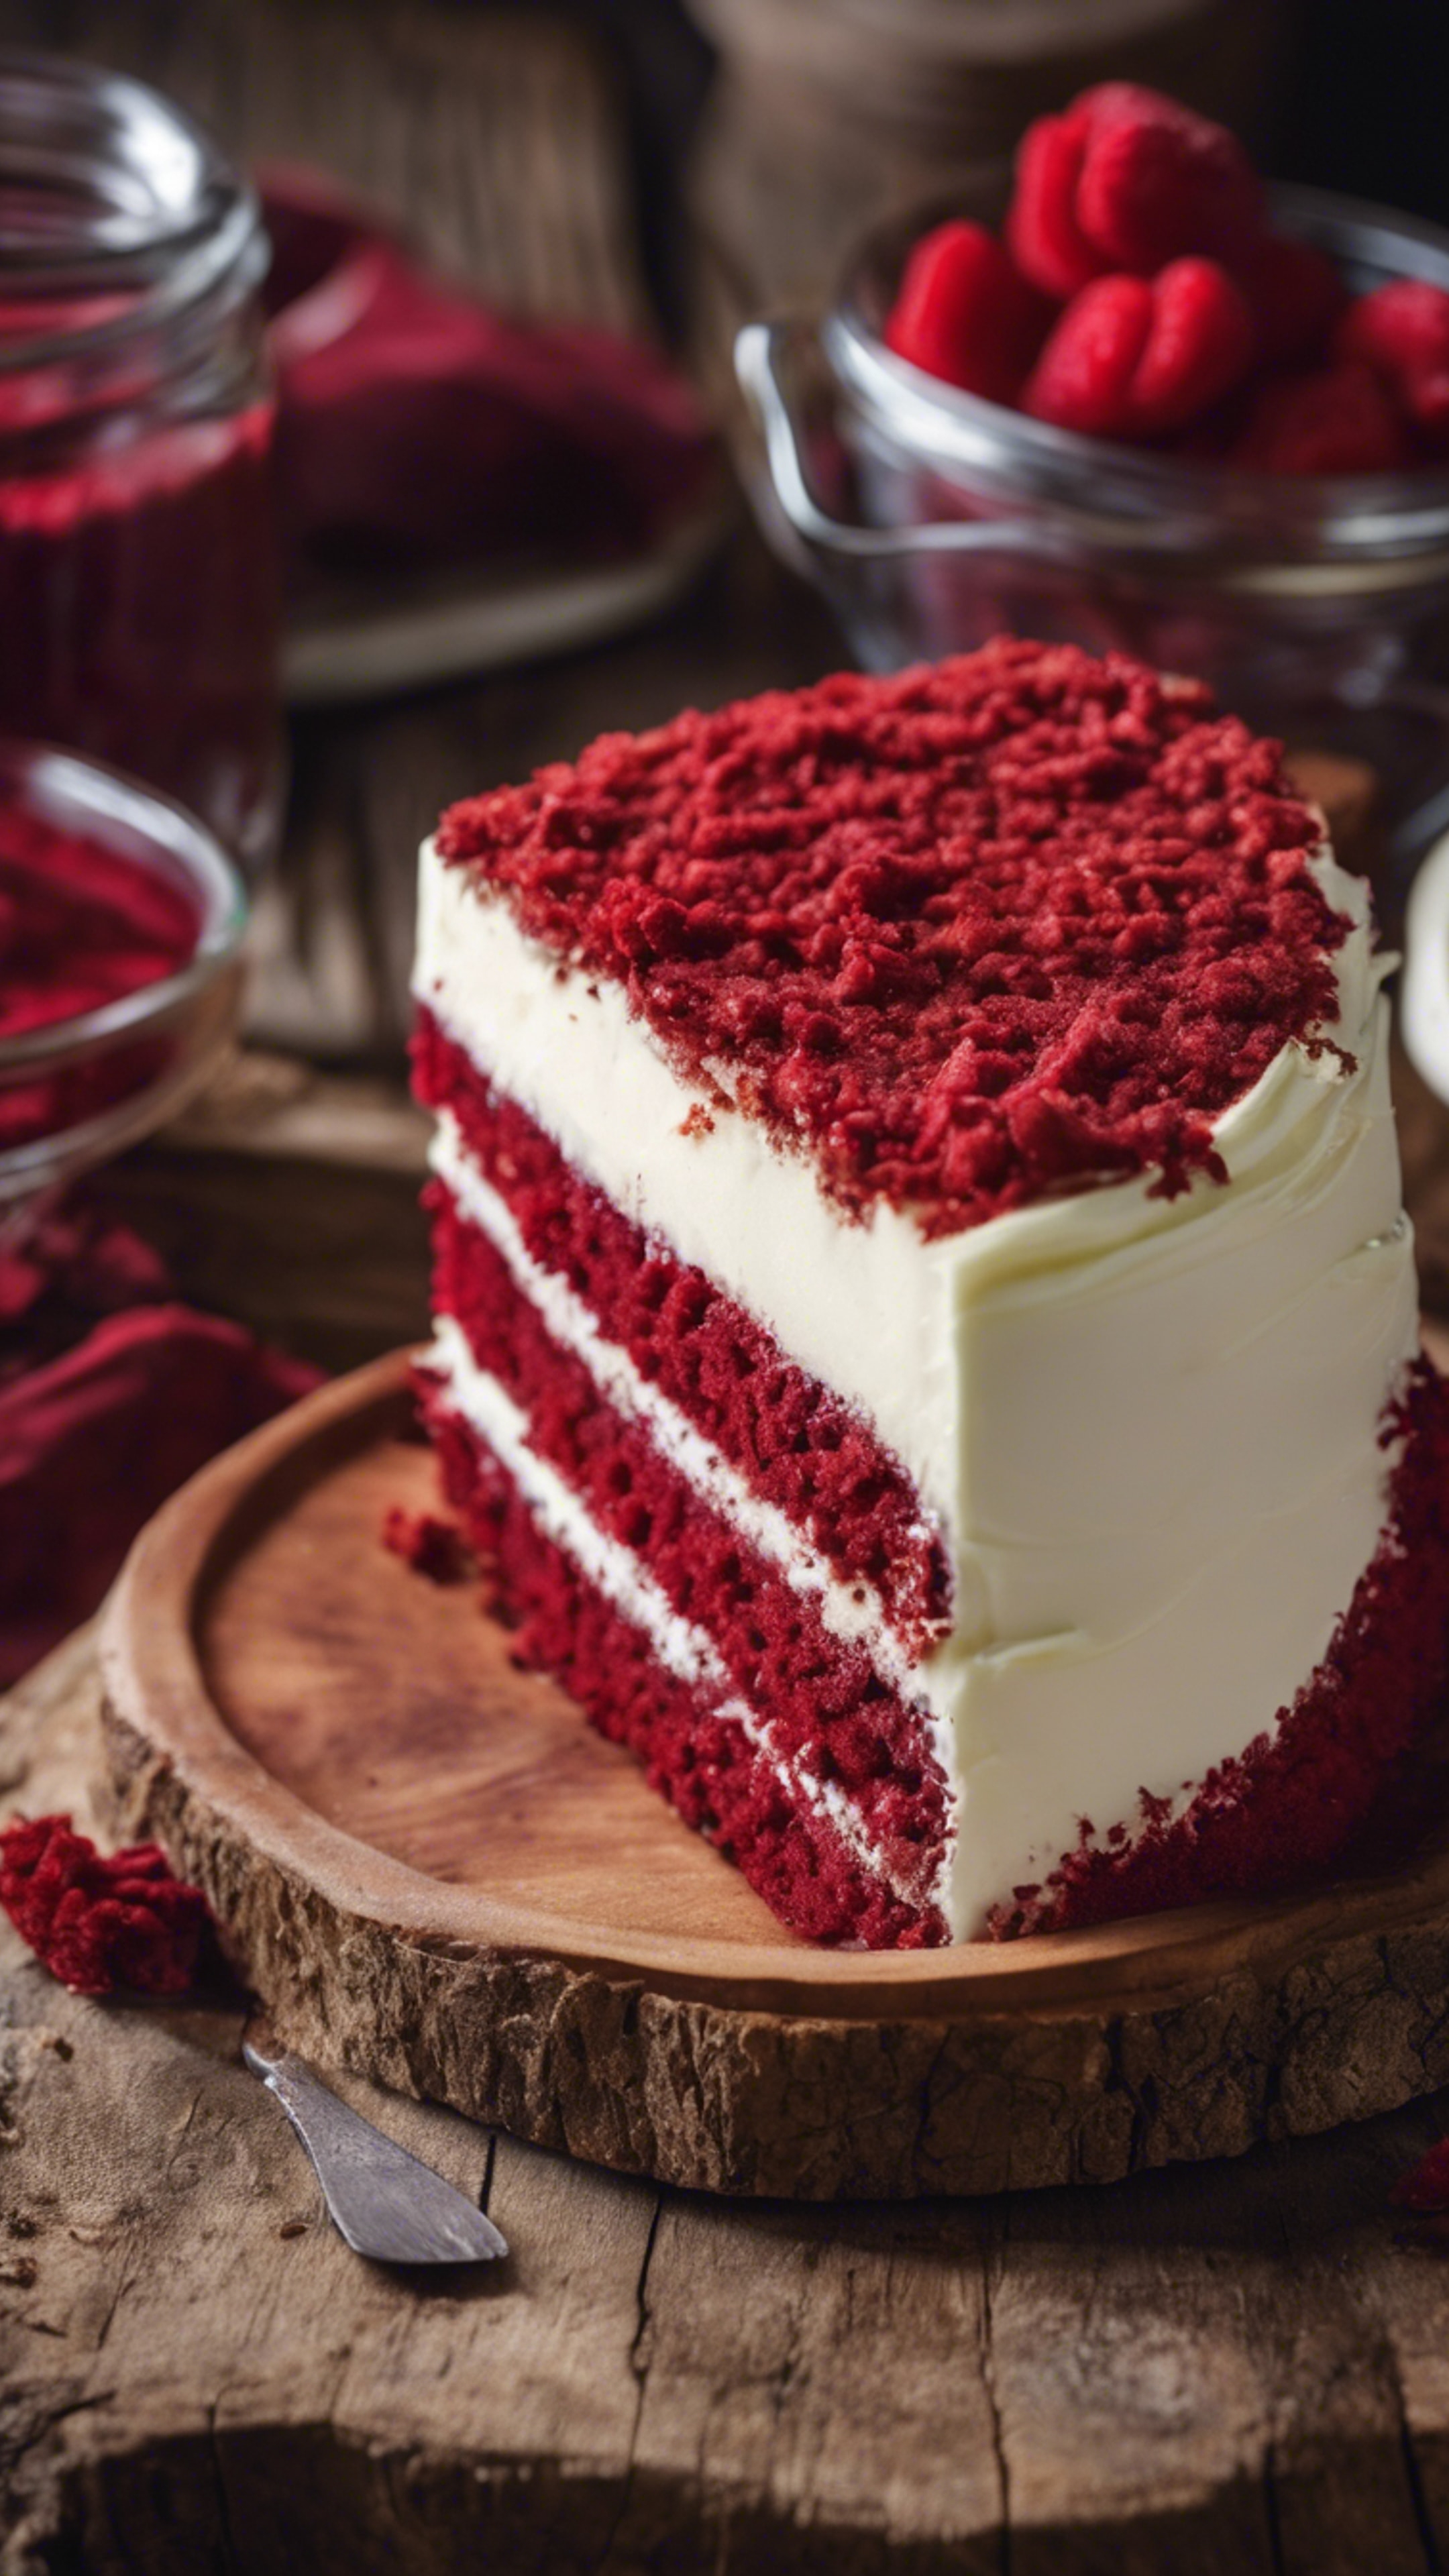 A slice of rich red velvet cake with a layer of cream cheese frosting, placed on a rustic wooden table. Fondo de pantalla[5b147ad1f433484e86de]